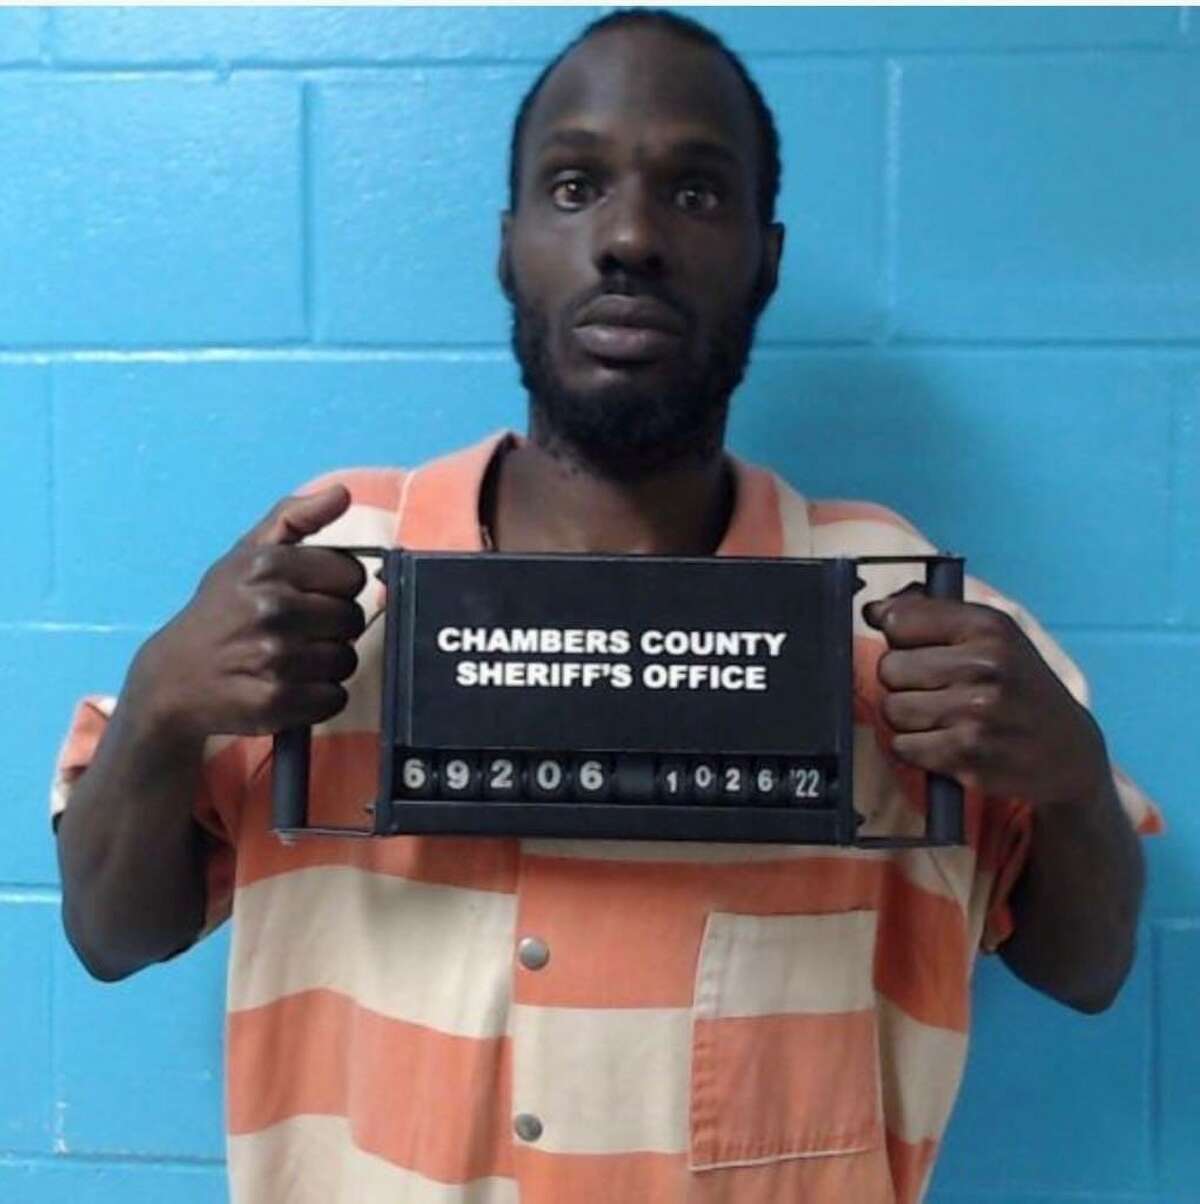 The Vidor Police Department announced 36-year-old Aubrey Young of New Orleans was arrested on Wednesday afternoon by the Chambers County Sheriff’s Office in connection to an alleged carjacking and high-speed pursuit.